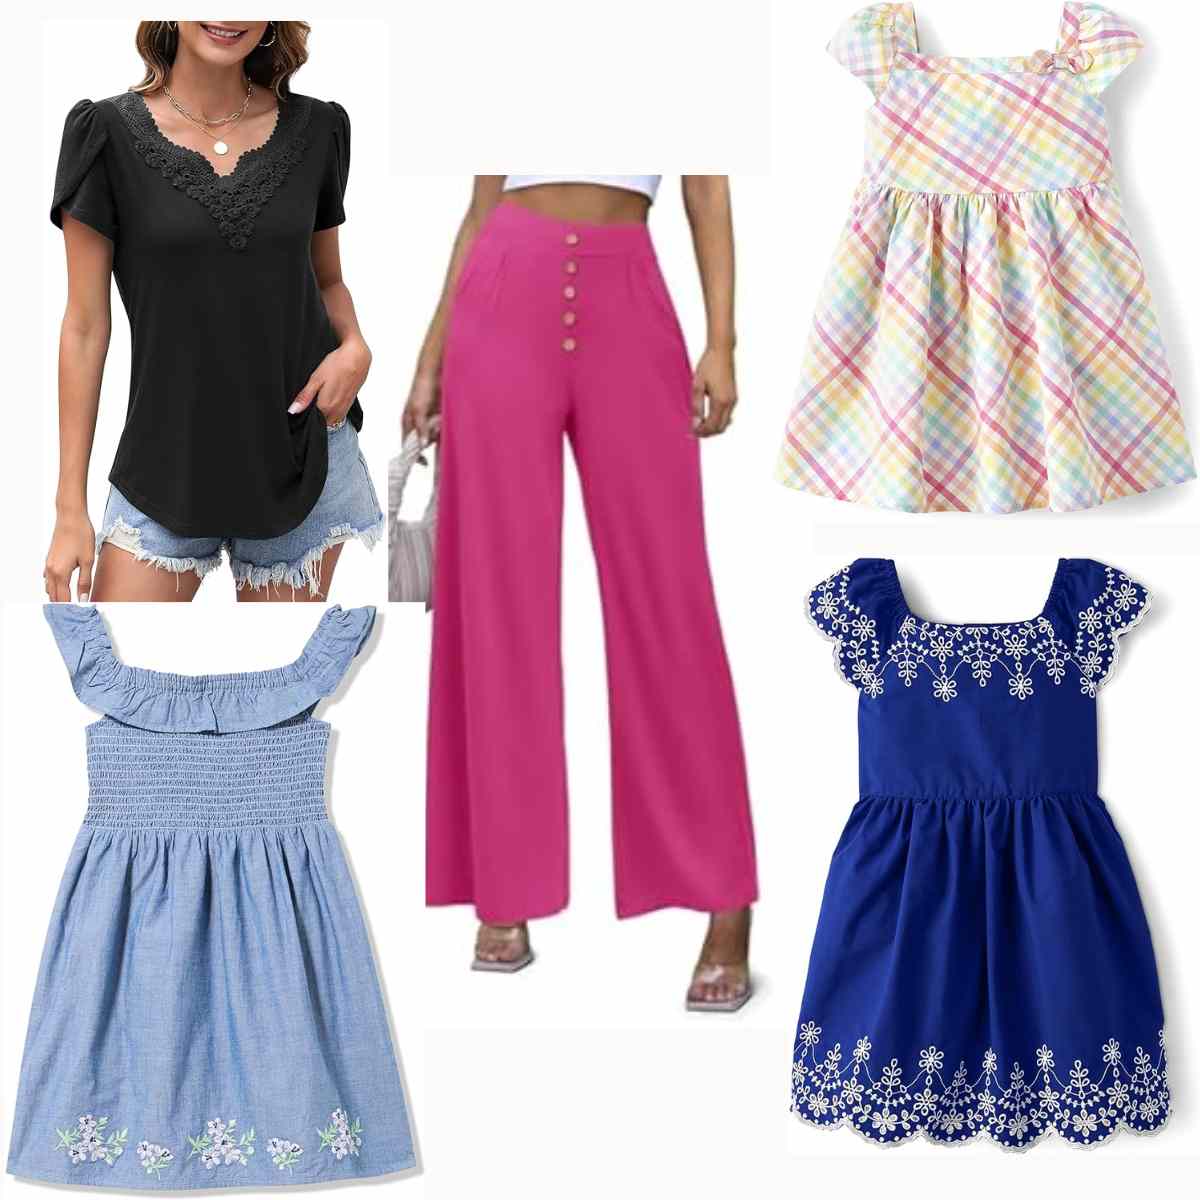 Br@nded Cotton dresses for $14| pants for $10| Tees for $9+ | Smart Savers